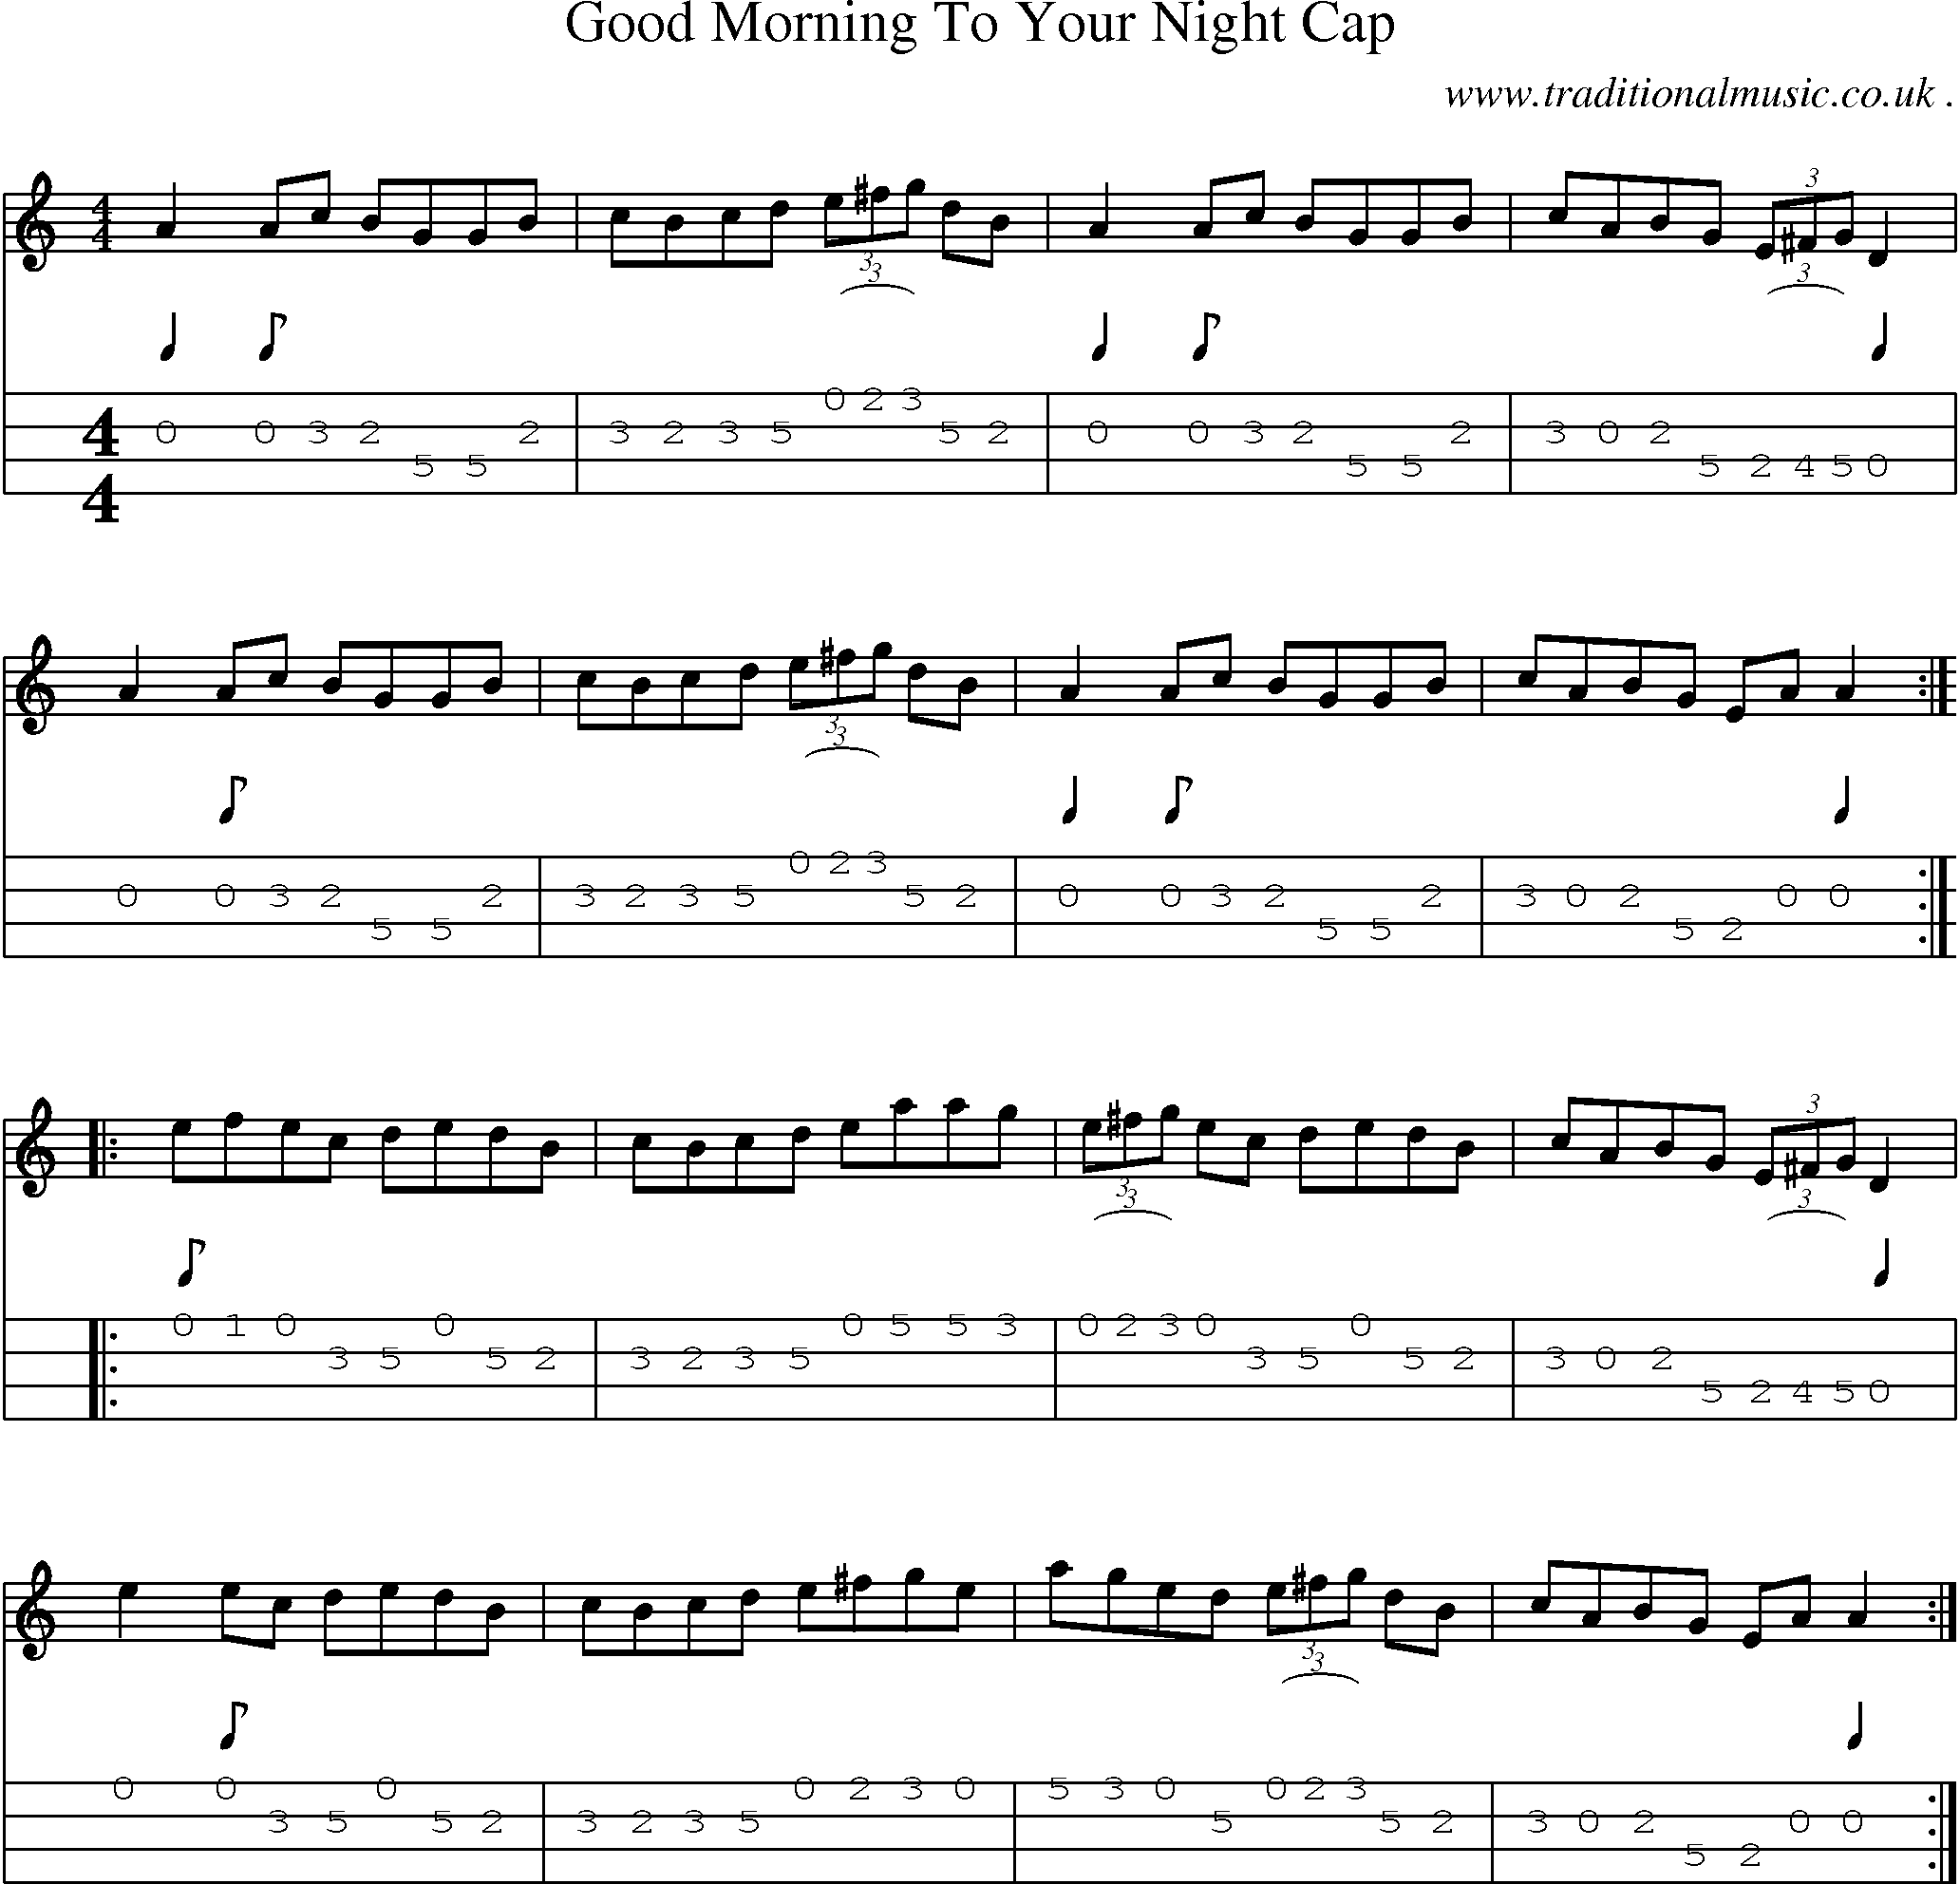 Sheet-Music and Mandolin Tabs for Good Morning To Your Night Cap